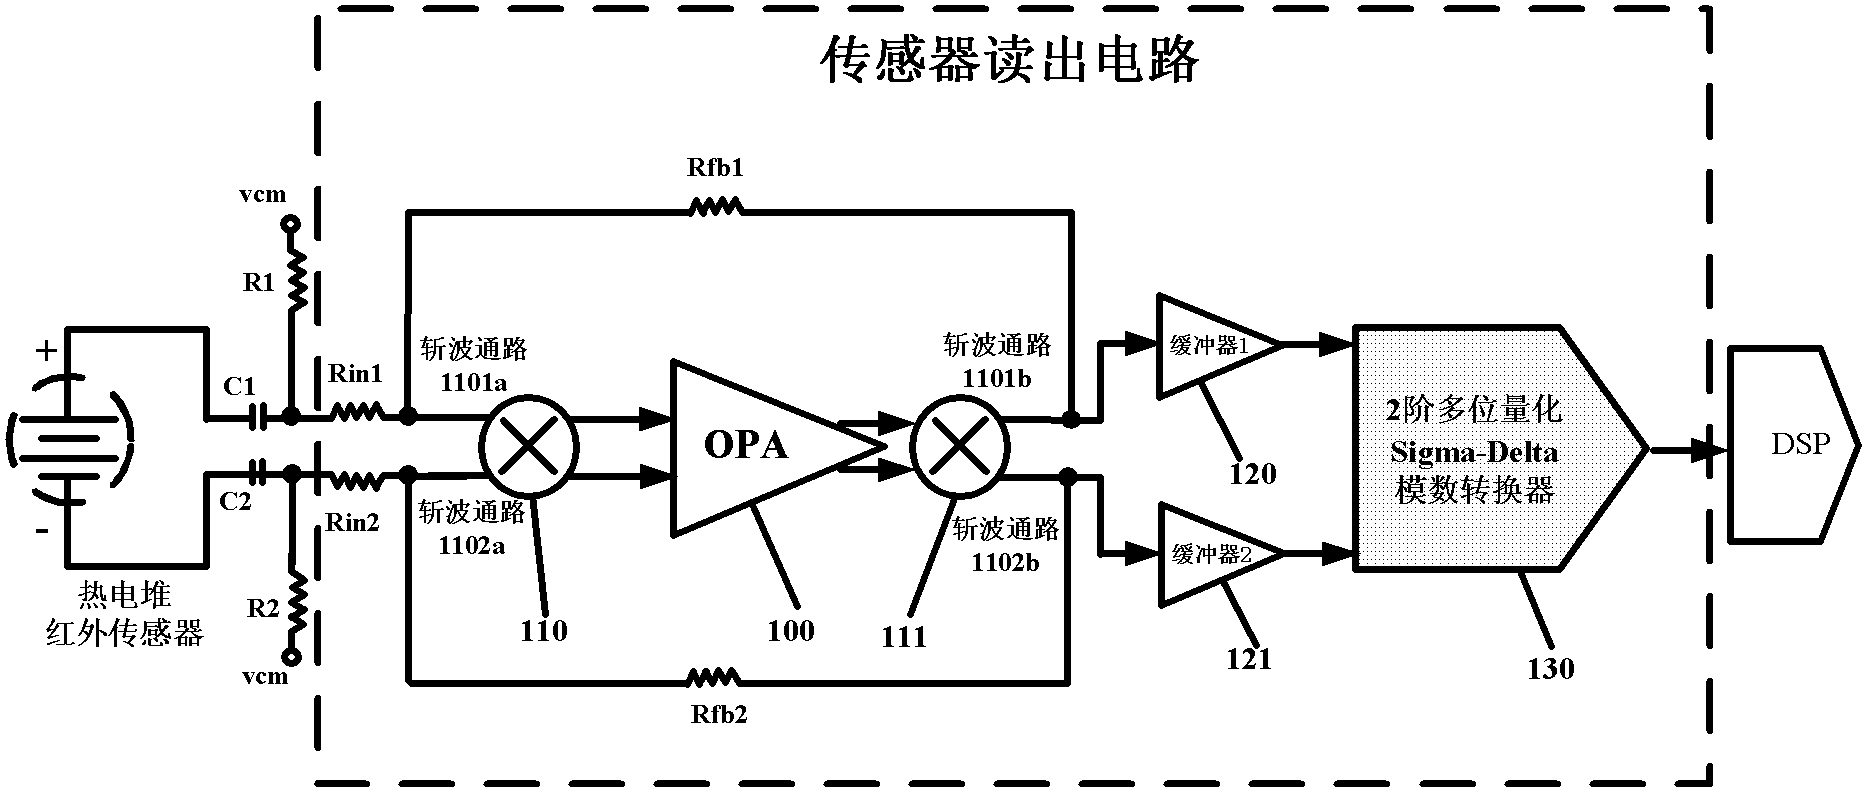 Reading circuit used for sensor